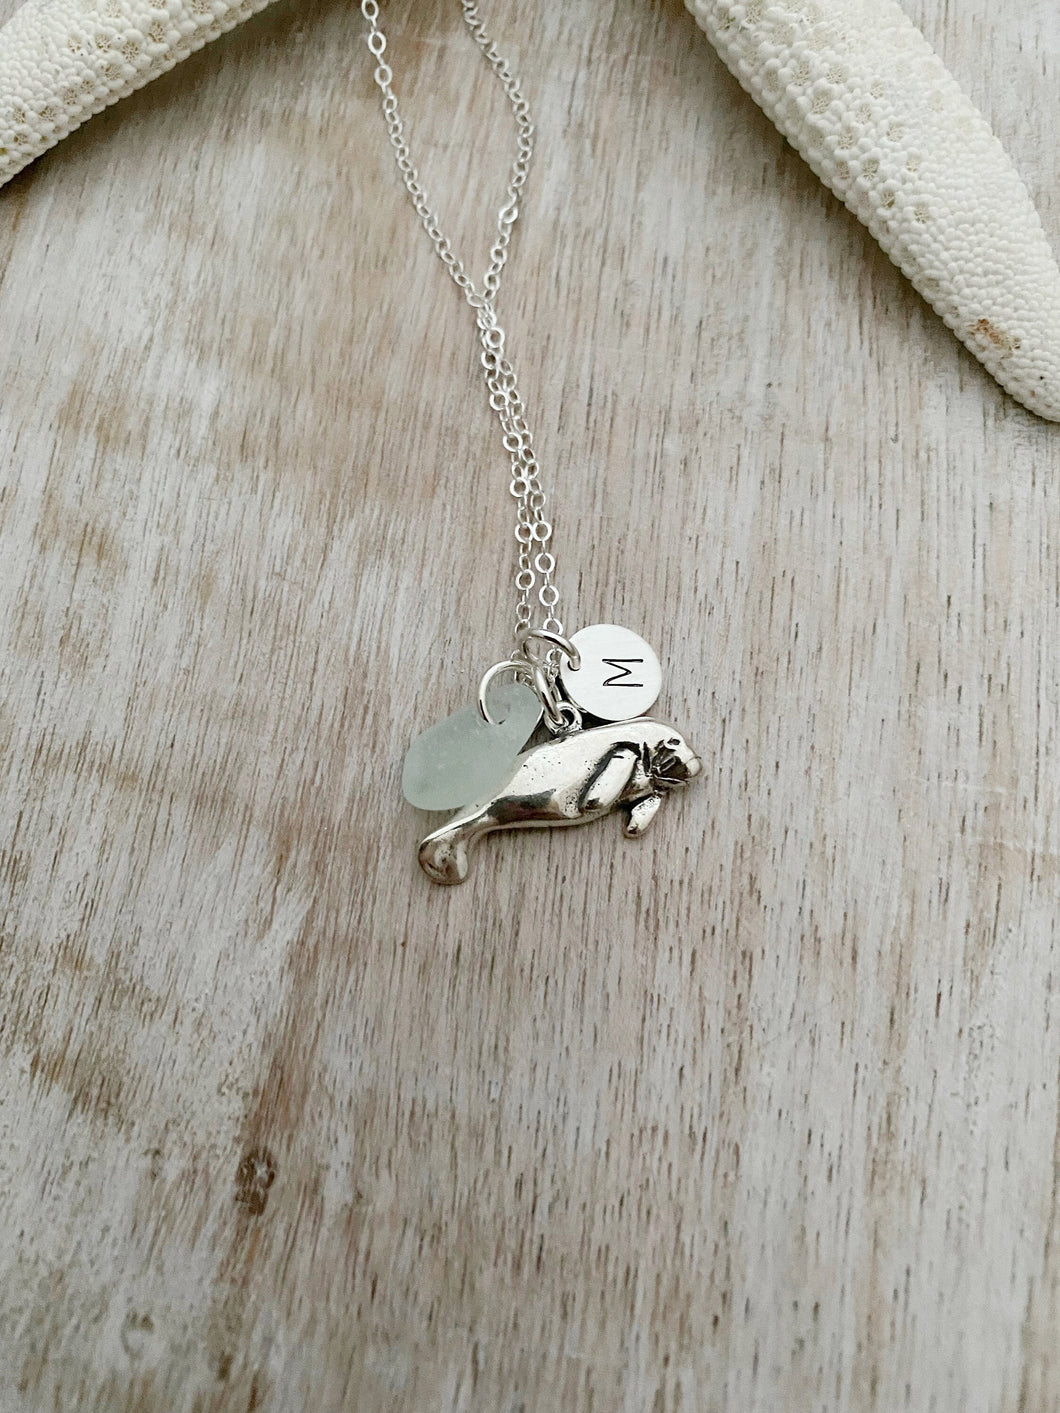 Sterling Silver Manatee Charm necklace with genuine Sea Glass and Personalized custom initial charm, made to order, Gift for beach lover